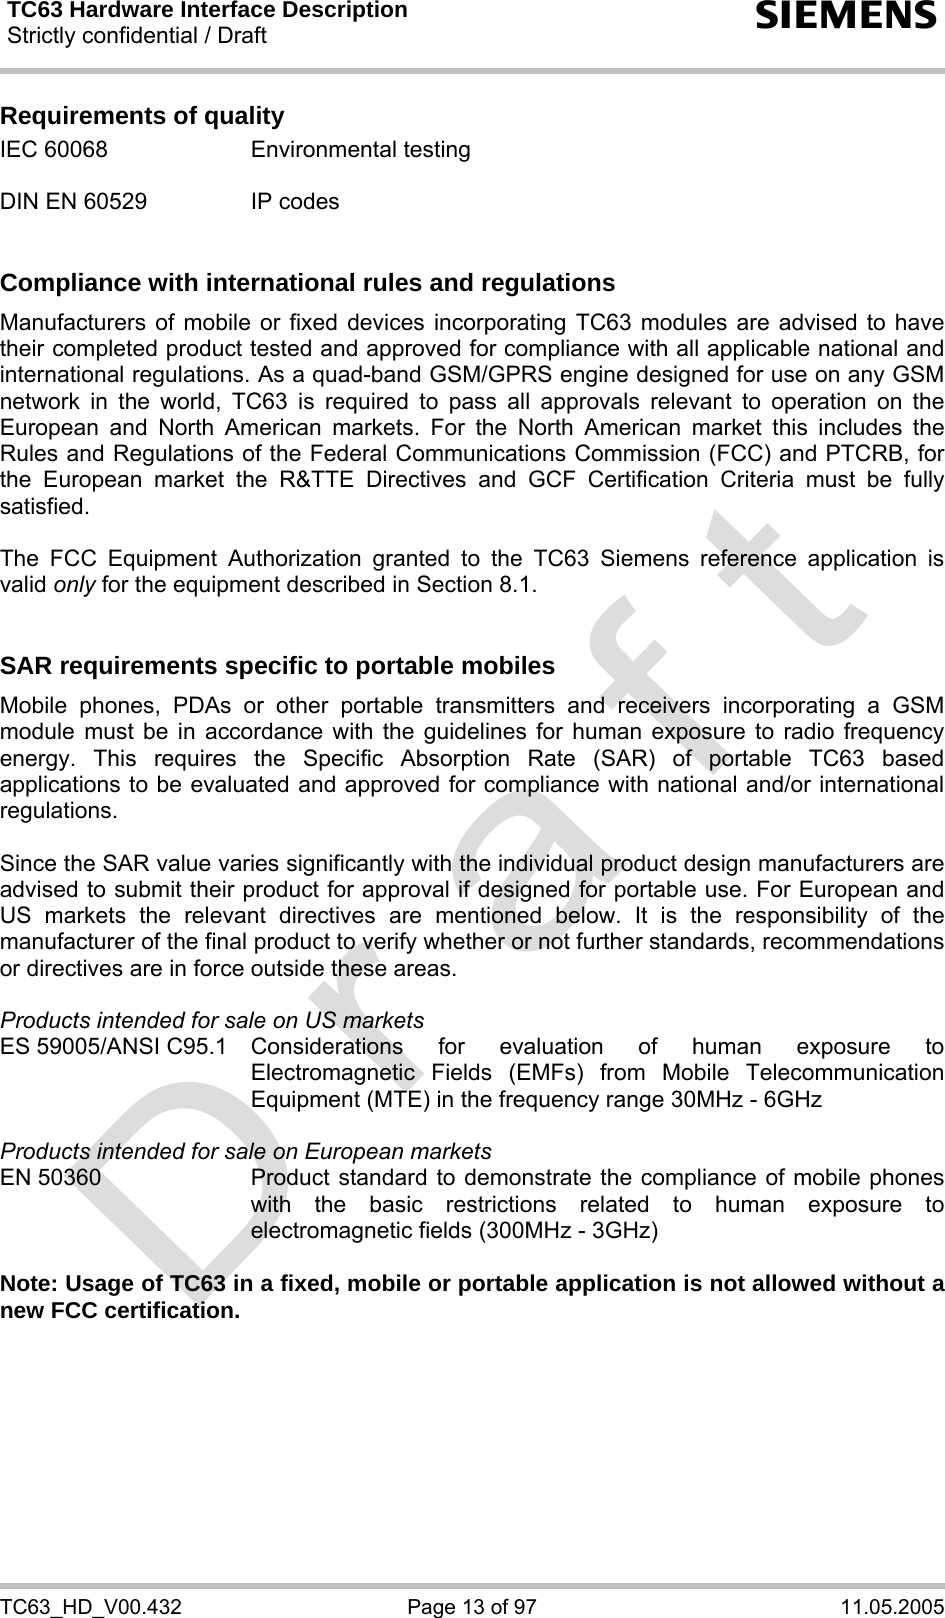 TC63 Hardware Interface Description Strictly confidential / Draft  s TC63_HD_V00.432  Page 13 of 97  11.05.2005 Requirements of quality IEC 60068  Environmental testing  DIN EN 60529  IP codes   Compliance with international rules and regulations Manufacturers of mobile or fixed devices incorporating TC63 modules are advised to have their completed product tested and approved for compliance with all applicable national and international regulations. As a quad-band GSM/GPRS engine designed for use on any GSM network in the world, TC63 is required to pass all approvals relevant to operation on the European and North American markets. For the North American market this includes the Rules and Regulations of the Federal Communications Commission (FCC) and PTCRB, for the European market the R&amp;TTE Directives and GCF Certification Criteria must be fully satisfied.  The FCC Equipment Authorization granted to the TC63 Siemens reference application is valid only for the equipment described in Section 8.1.   SAR requirements specific to portable mobiles Mobile phones, PDAs or other portable transmitters and receivers incorporating a GSM module must be in accordance with the guidelines for human exposure to radio frequency energy. This requires the Specific Absorption Rate (SAR) of portable TC63 based applications to be evaluated and approved for compliance with national and/or international regulations.   Since the SAR value varies significantly with the individual product design manufacturers are advised to submit their product for approval if designed for portable use. For European and US markets the relevant directives are mentioned below. It is the responsibility of the manufacturer of the final product to verify whether or not further standards, recommendations or directives are in force outside these areas.   Products intended for sale on US markets ES 59005/ANSI C95.1 Considerations for evaluation of human exposure to Electromagnetic Fields (EMFs) from Mobile Telecommunication Equipment (MTE) in the frequency range 30MHz - 6GHz   Products intended for sale on European markets EN 50360  Product standard to demonstrate the compliance of mobile phones with the basic restrictions related to human exposure to electromagnetic fields (300MHz - 3GHz)  Note: Usage of TC63 in a fixed, mobile or portable application is not allowed without a new FCC certification.  